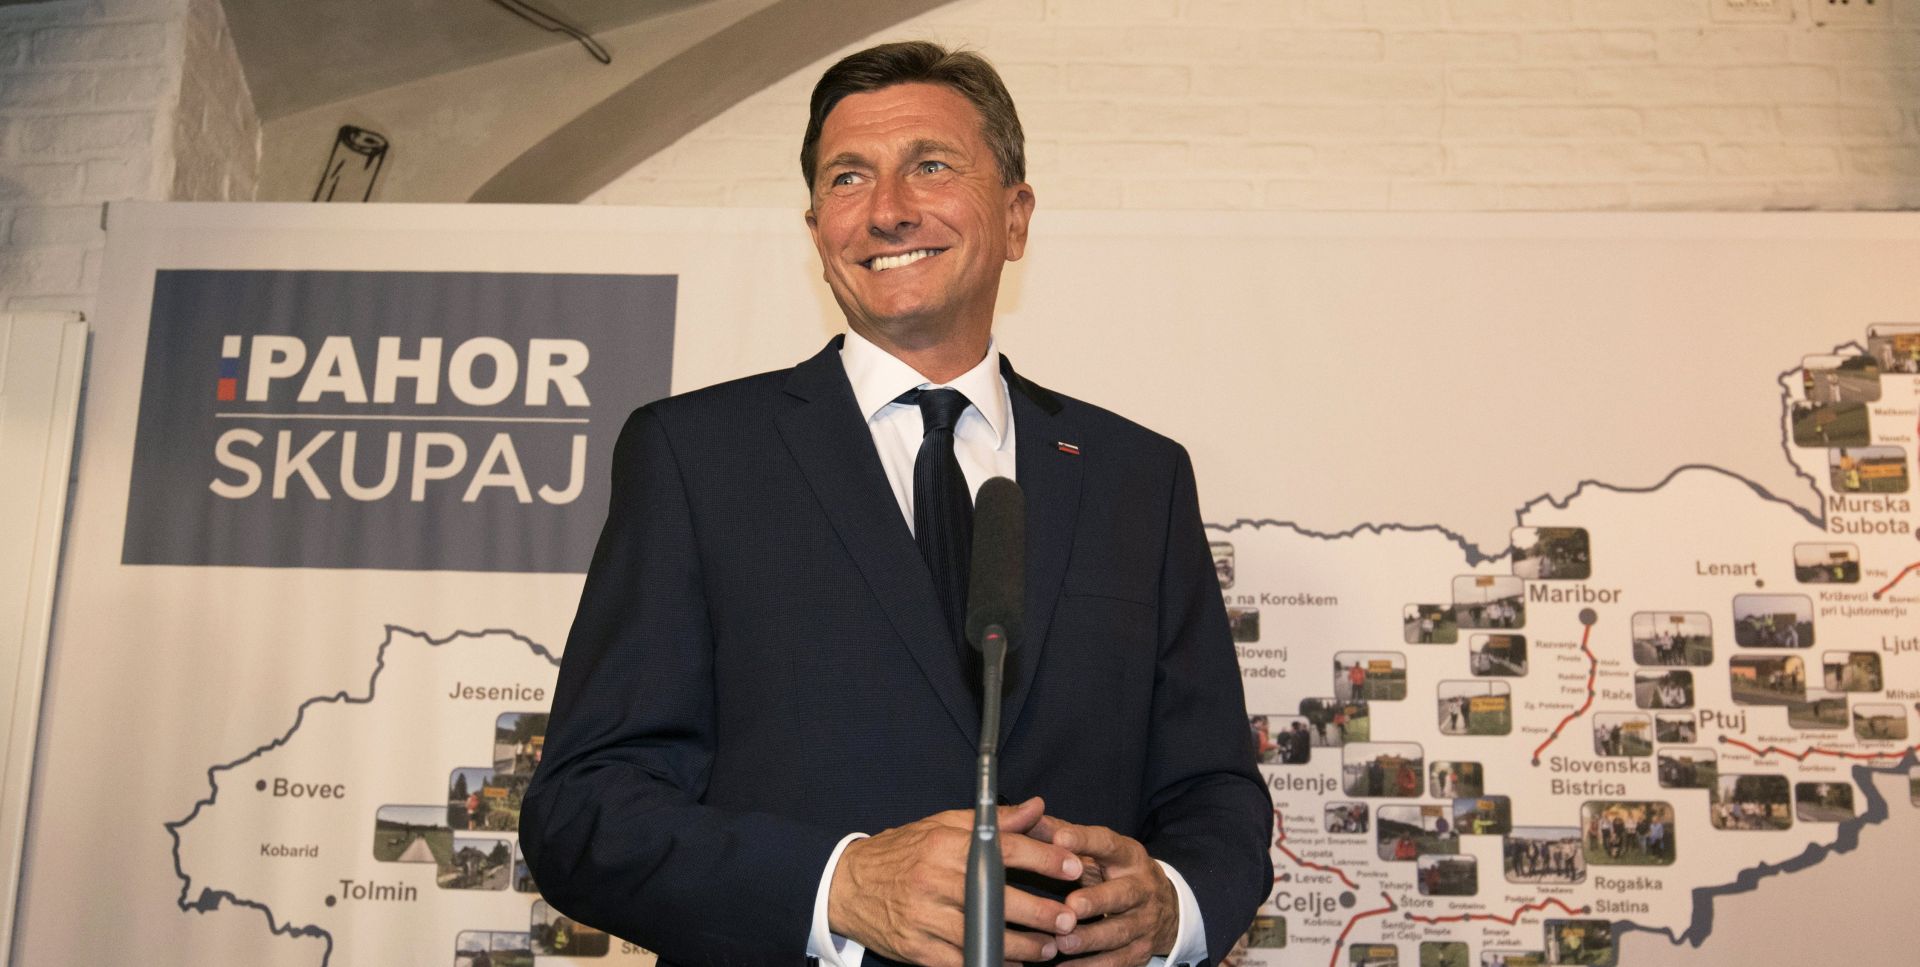 epa06282981 Slovenian President Borut Pahor gives a statement after first results of votes in the Slovenian Presidential Elections 2017 at a polling station Sempeter-Nova Gorica, Slovenia, 22 October 2017. According to exit poll results, Pahor was elected for the second term in the office winning 56.2 percent of the votes.  EPA/IGOR KUPLJENIK